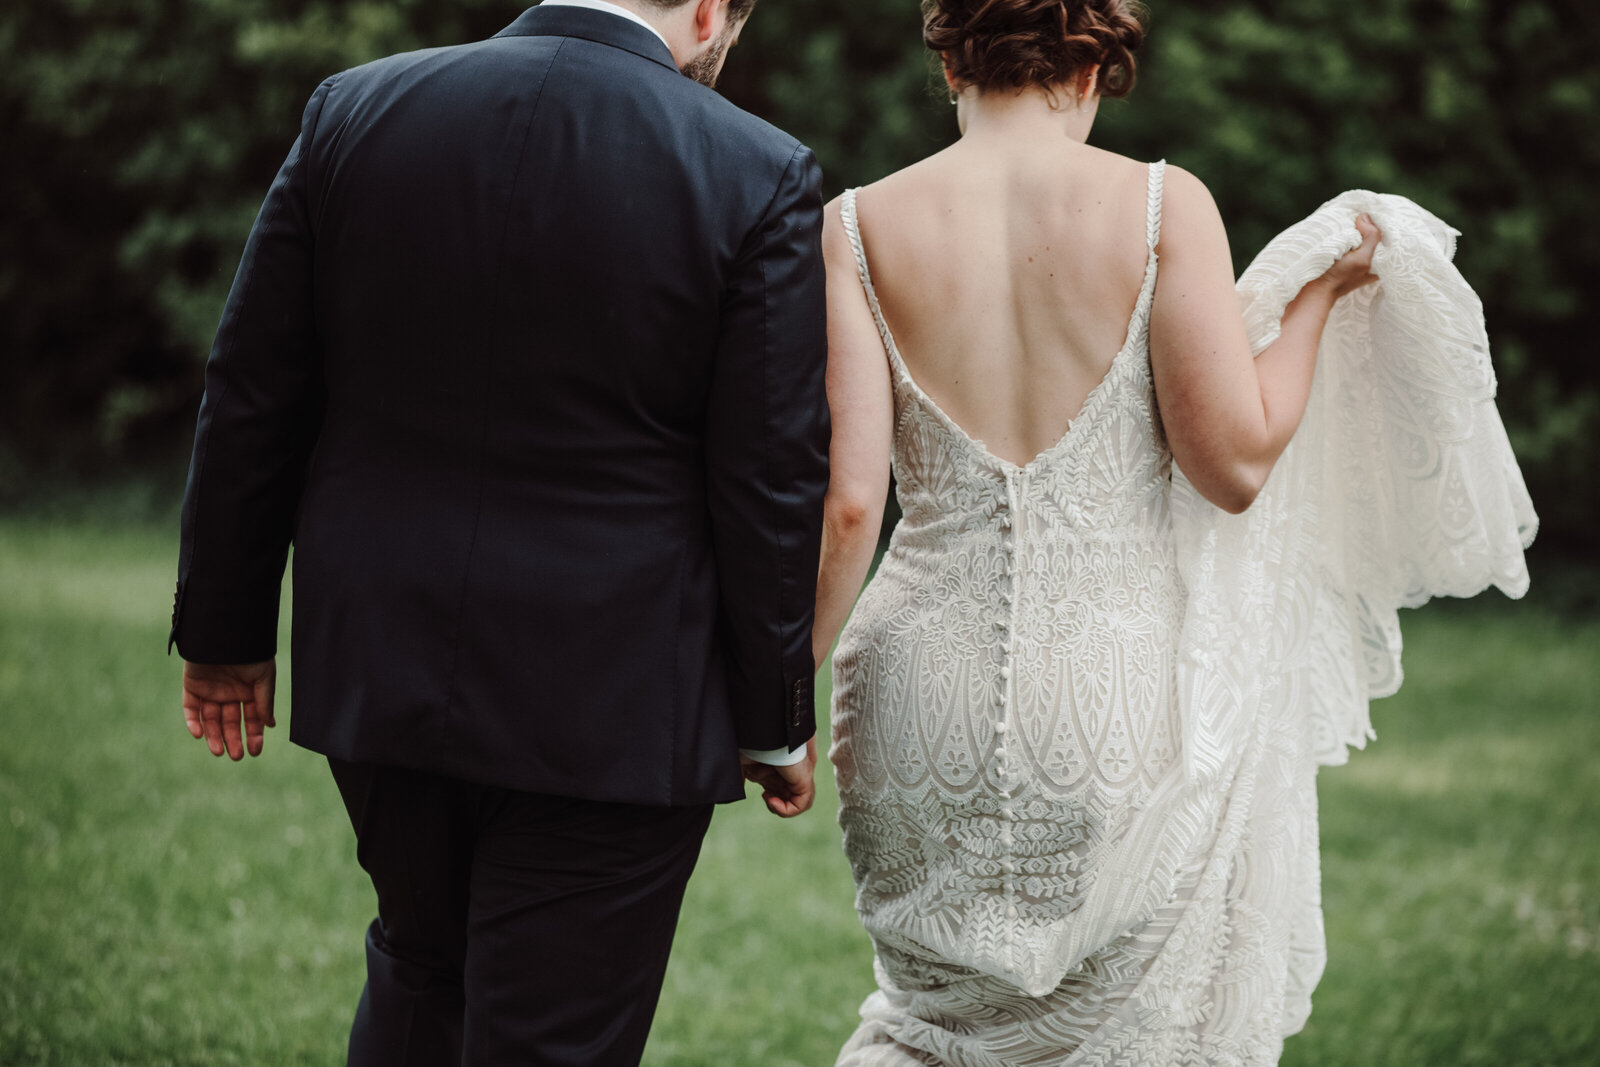 A bride and groom walk away holding her dress